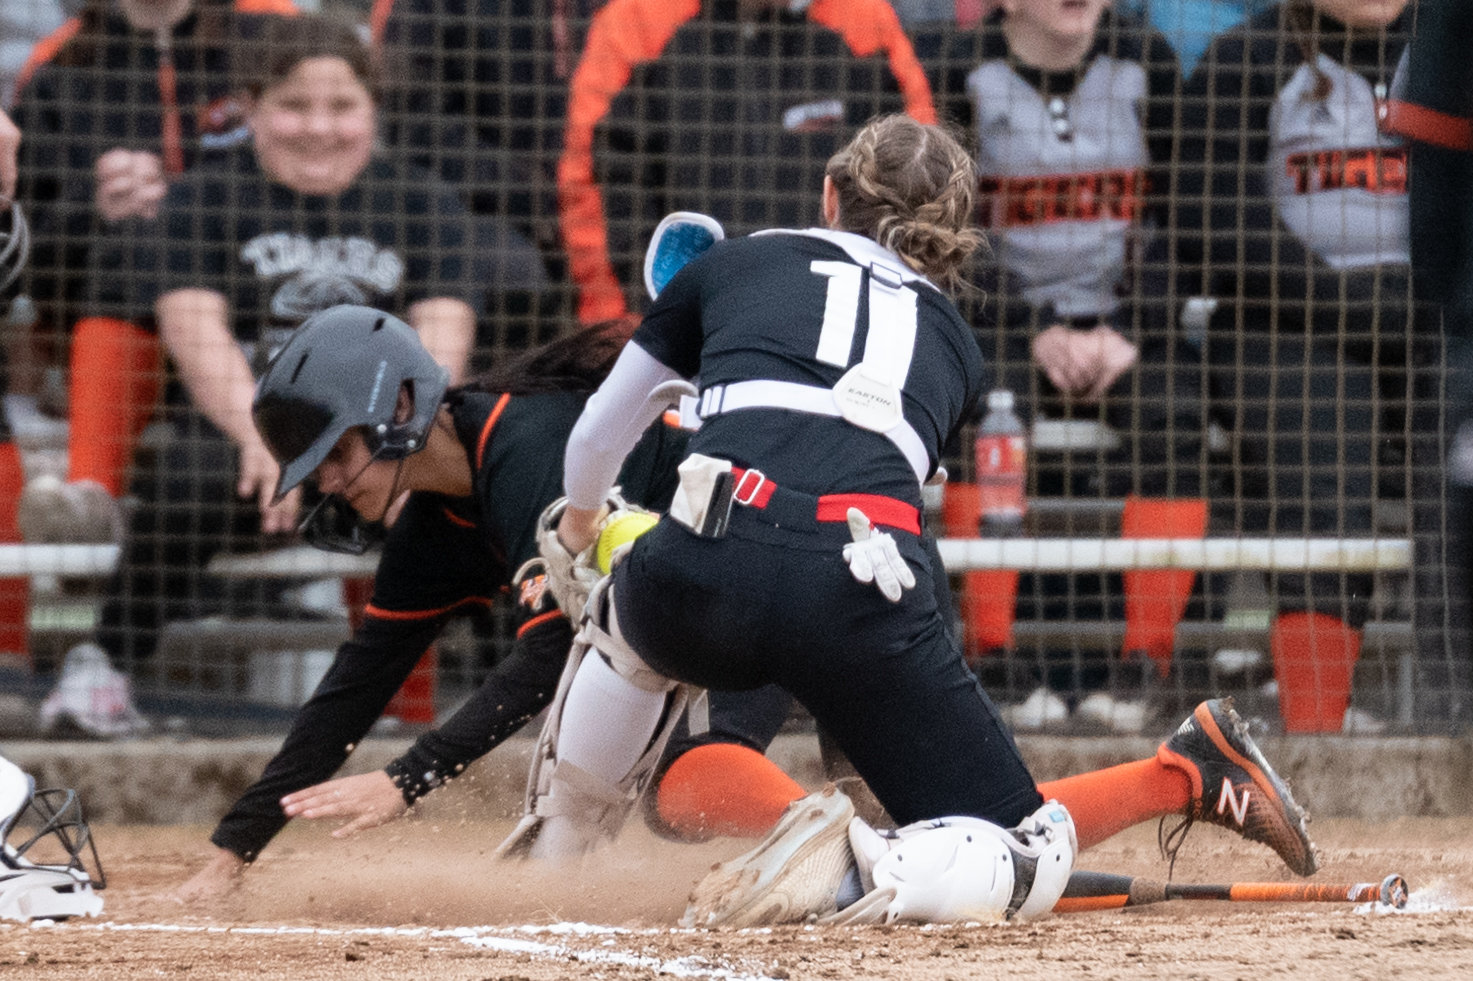 Centralia's Maddie Sievert slides into home plate as the Shelton catcher looks to get her out May 2.